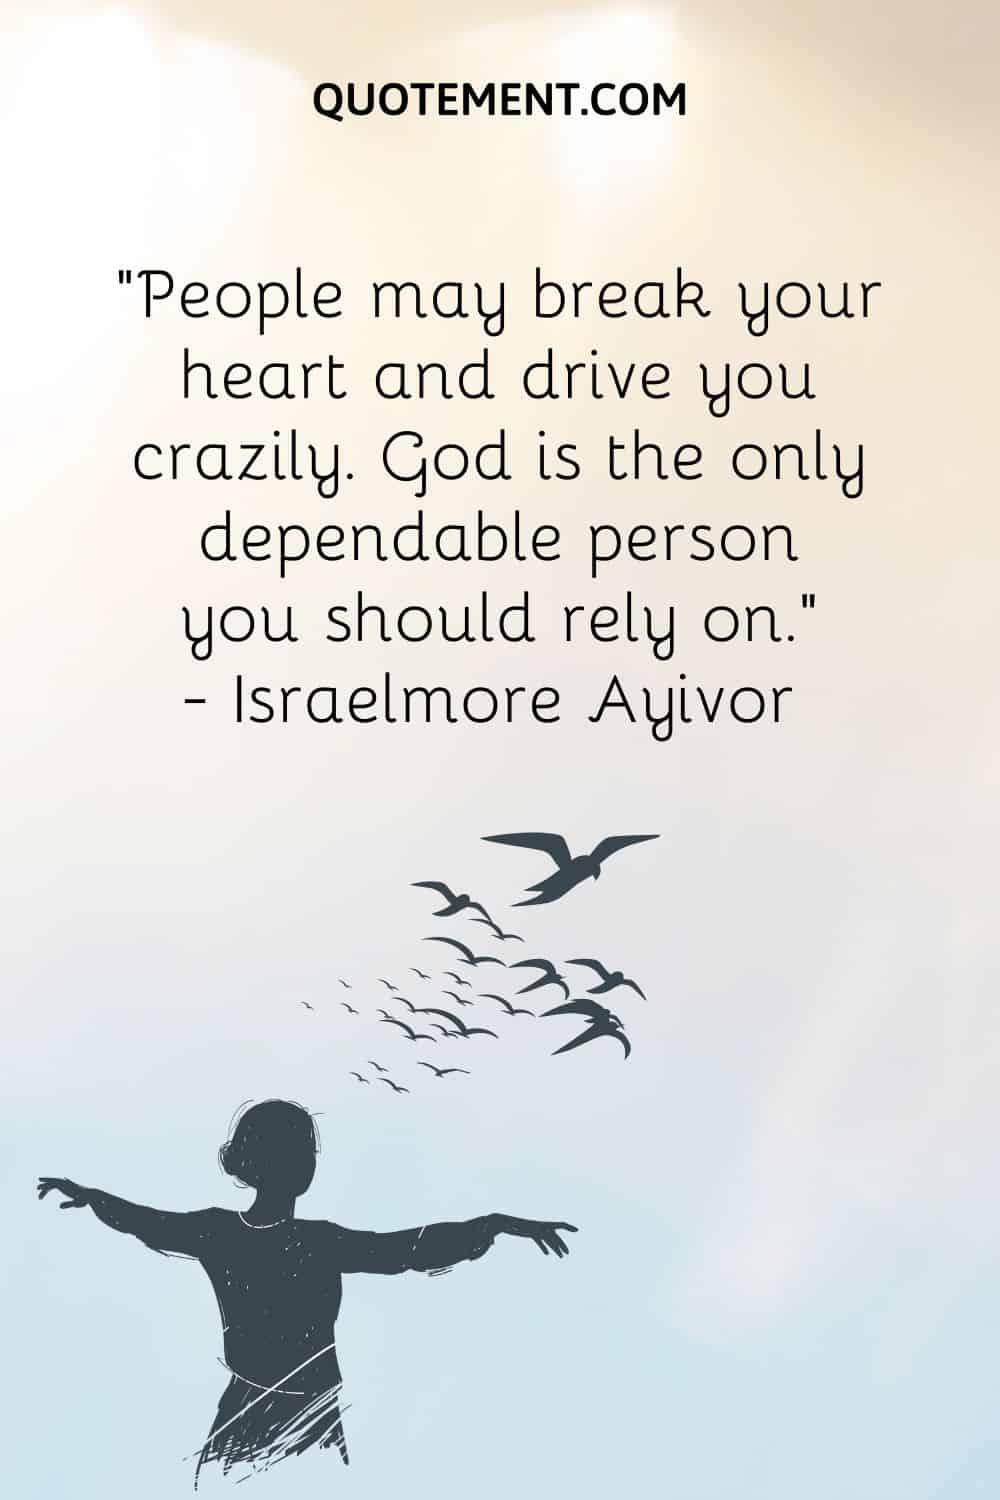 “People may break your heart and drive you crazily. God is the only dependable person you should rely on.” ― Israelmore Ayivor